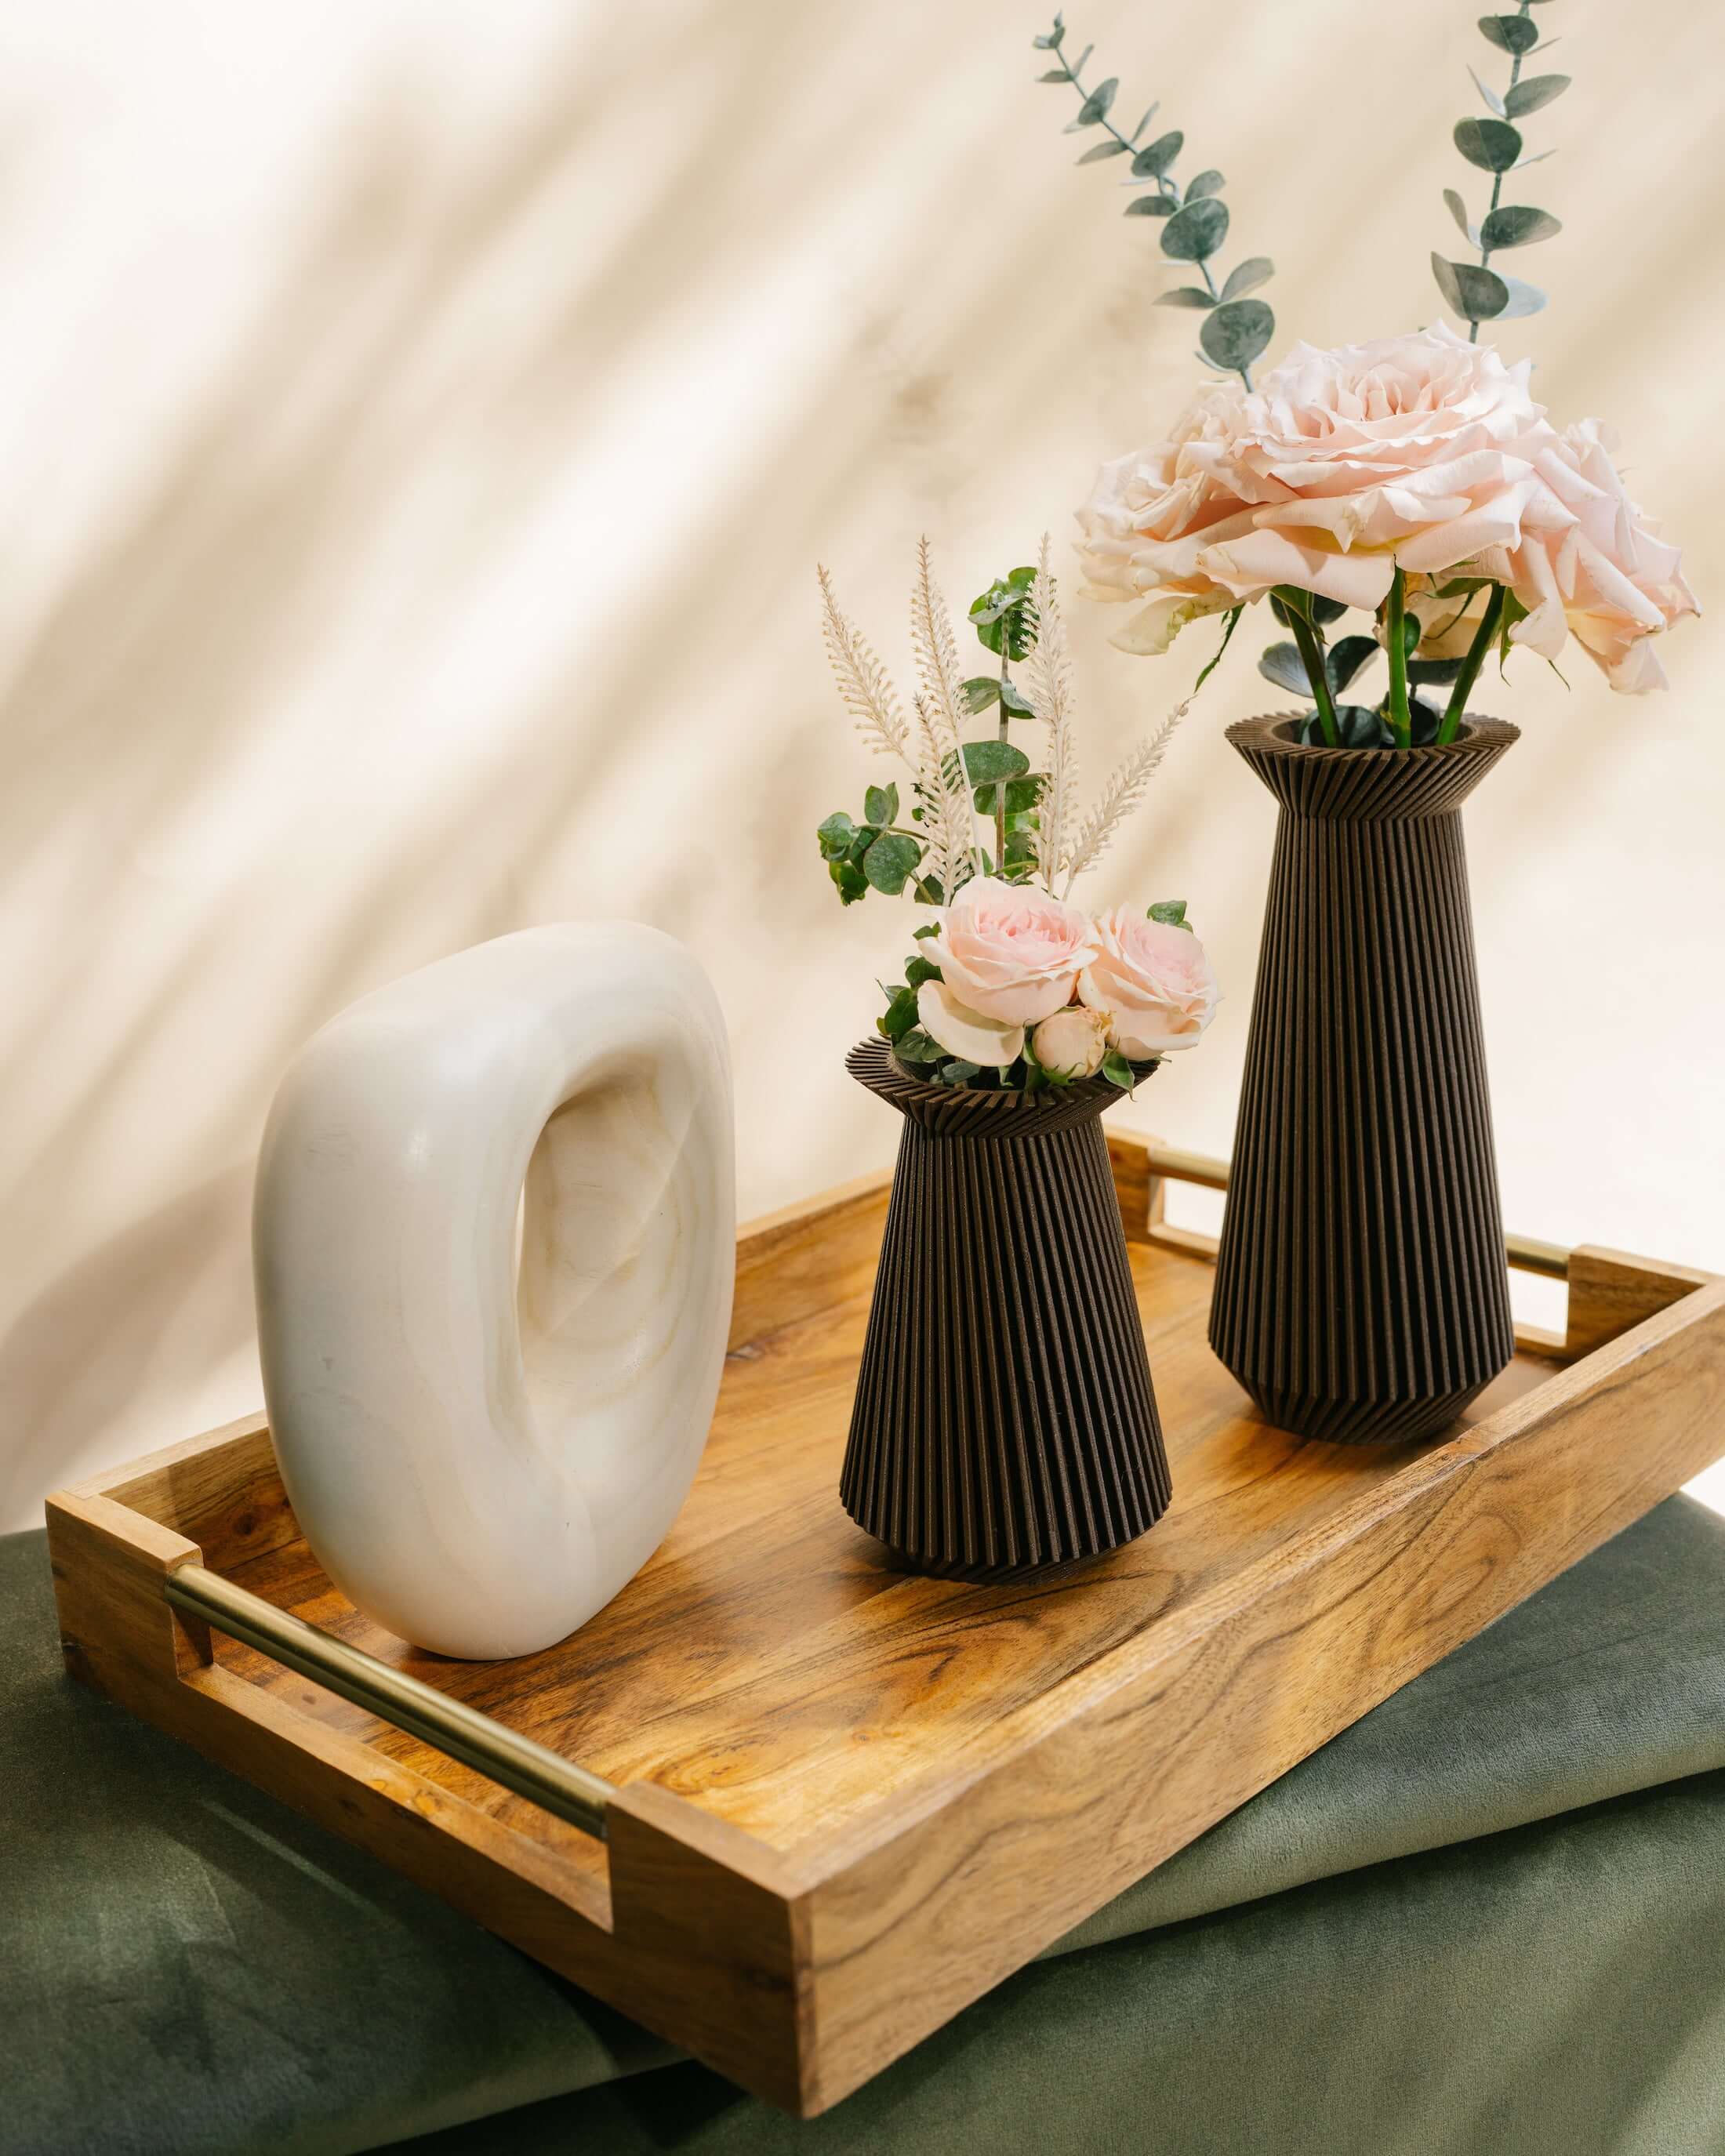 Two BANDA brown vases with flowers and accent decor.